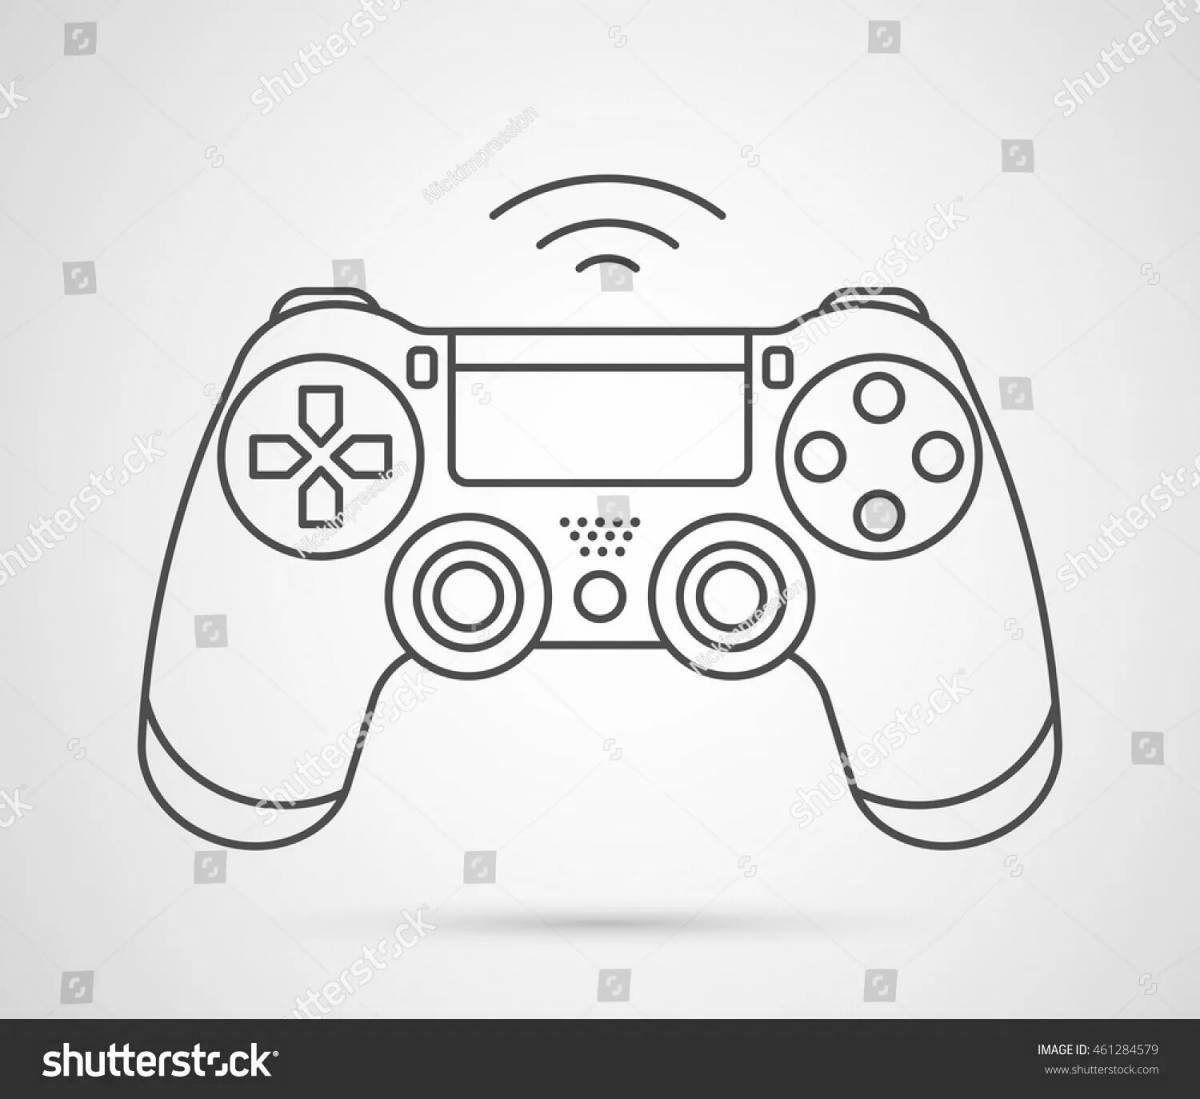 Playful sony playstation coloring page